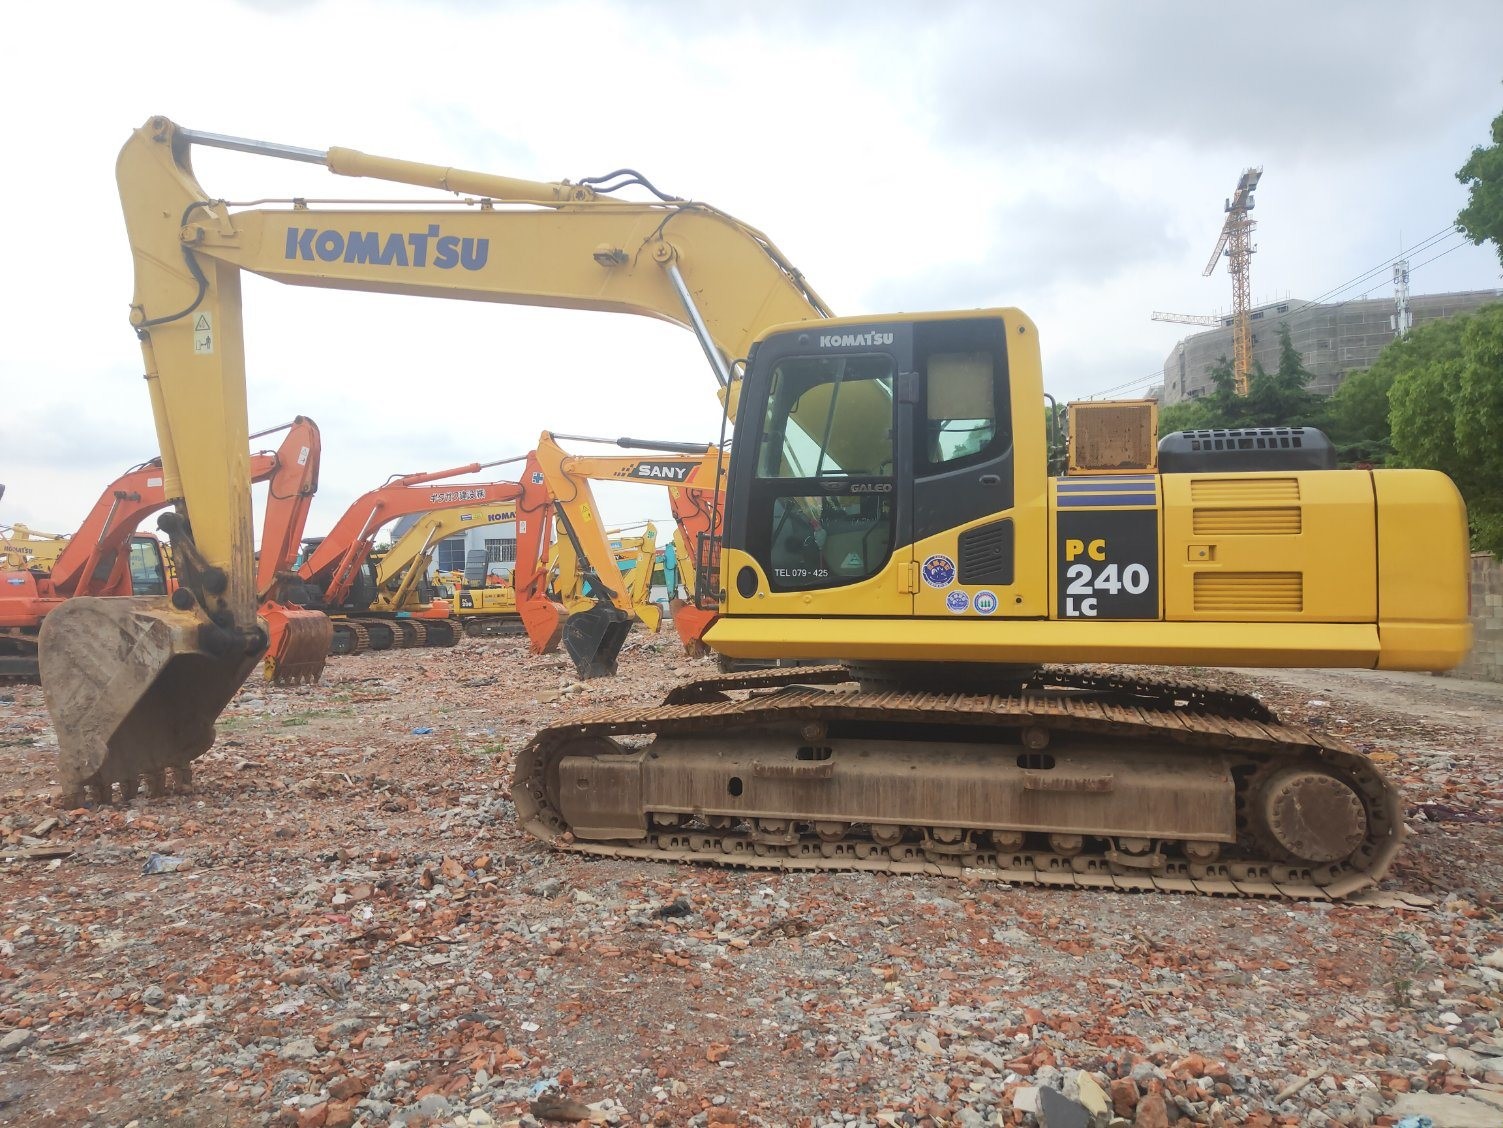 China                  Good and Cheap PC240-8 Komatsu Used Excavator for Sale Secondhand Excavator Komatsu PC200 PC210 PC220 PC230 PC240 PC270 Track Digger High Quality Hot Sale              factory